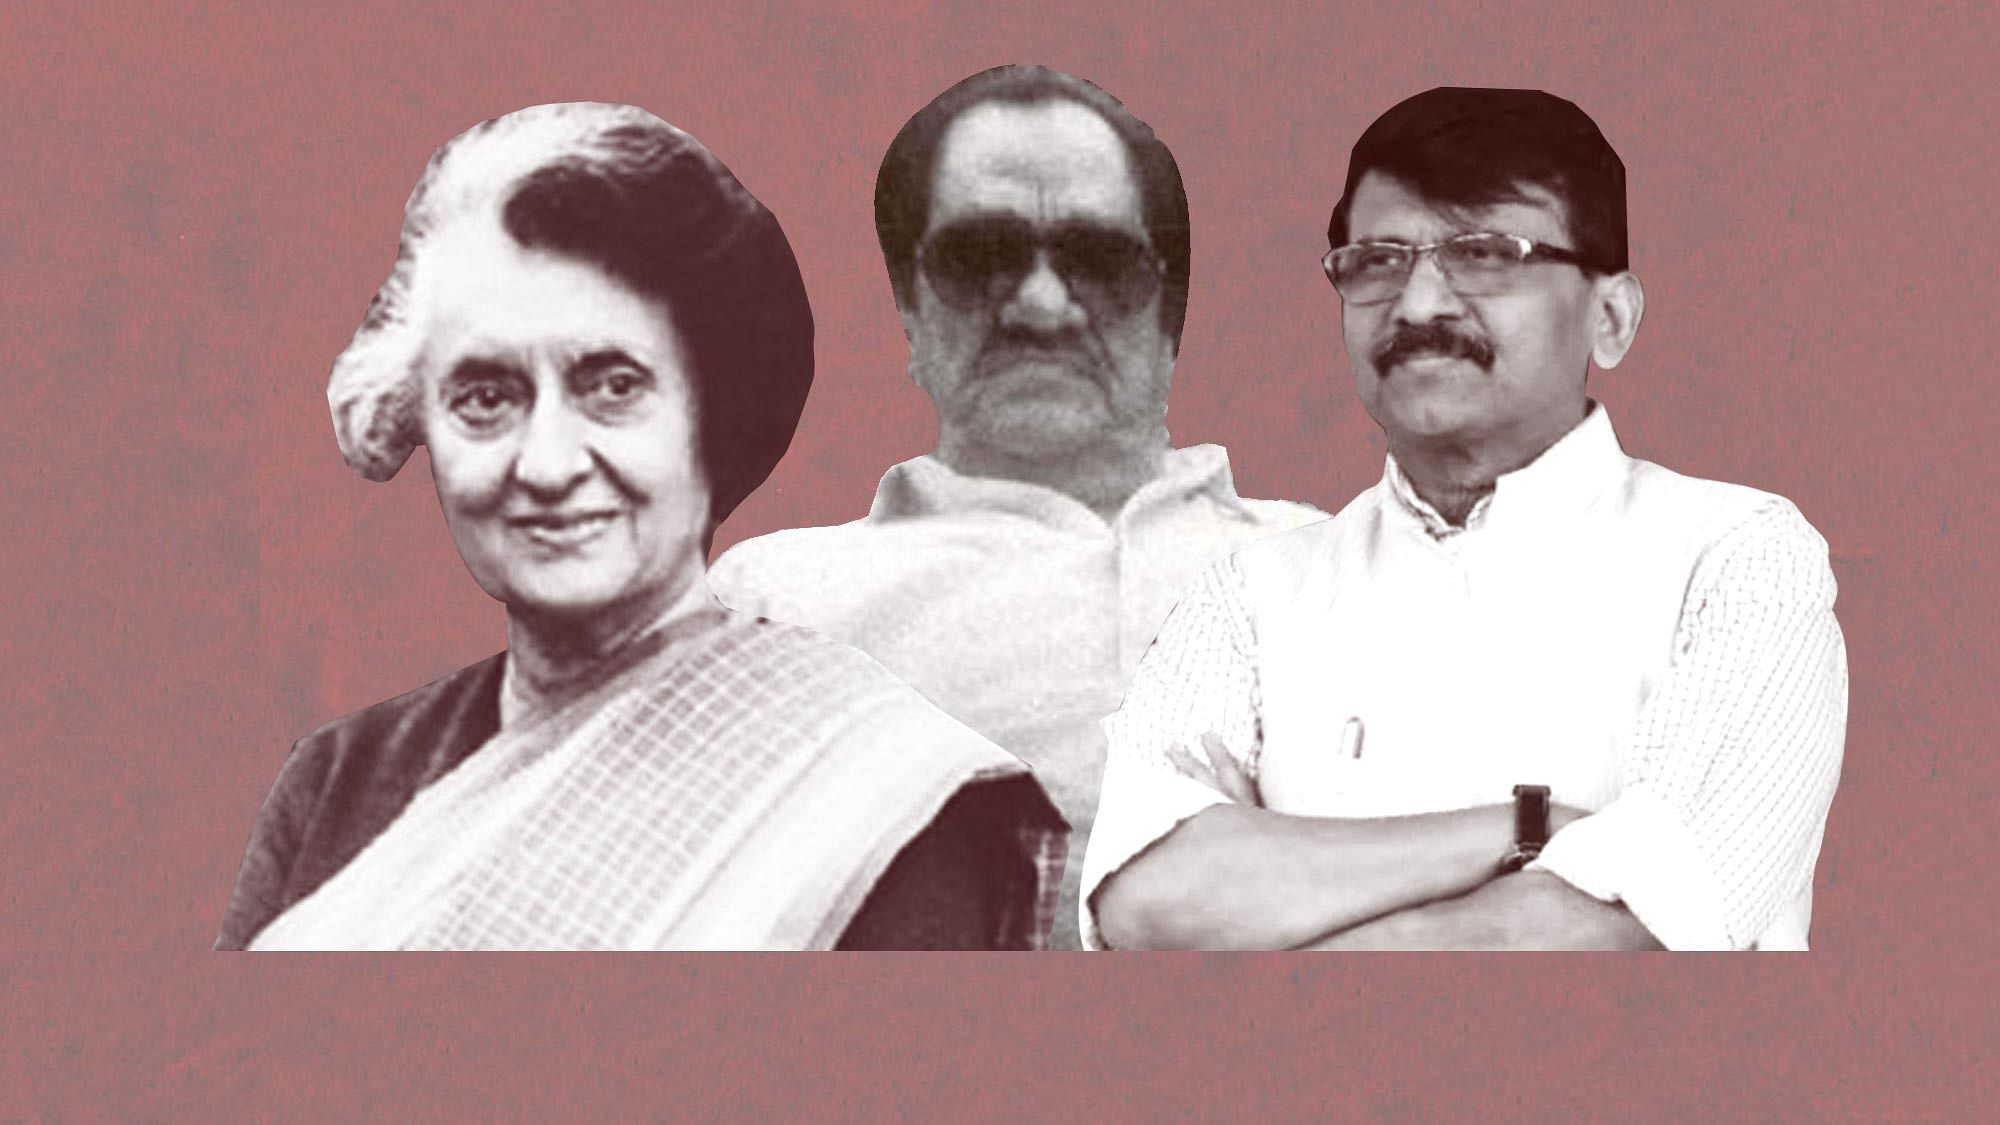 Sanjay Raut has claimed, in an interview, that Indira Gandhi used to meet underworld don Karim Lala in the 1960s.